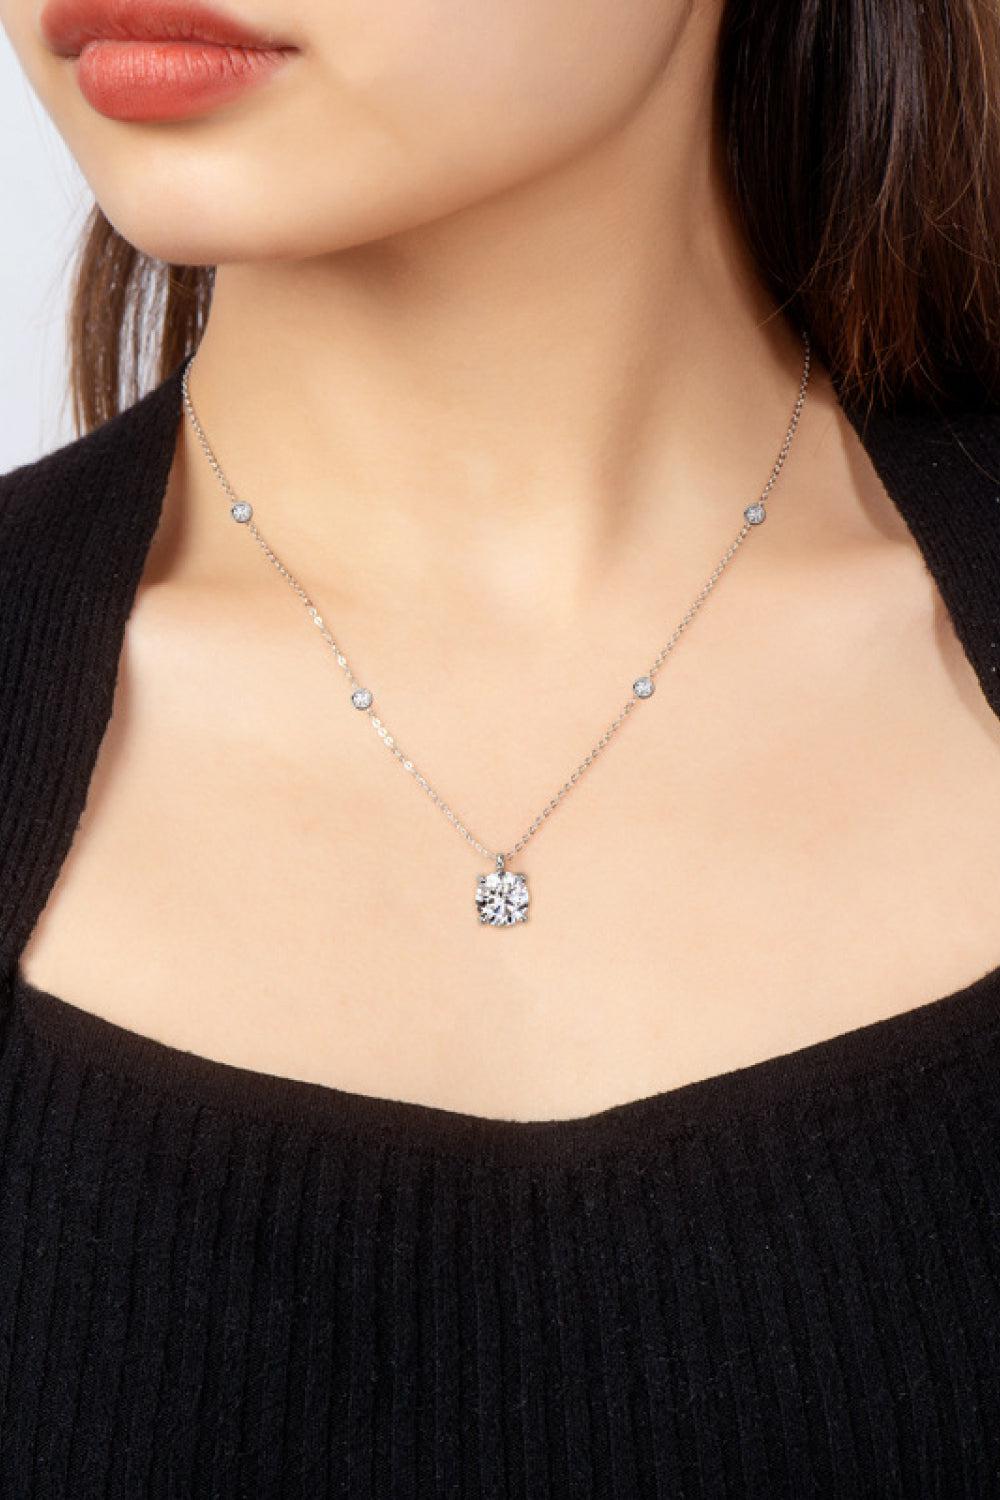 2 Carat Moissanite 4-Prong 925 Sterling Silver Necklace BLUE ZONE PLANET